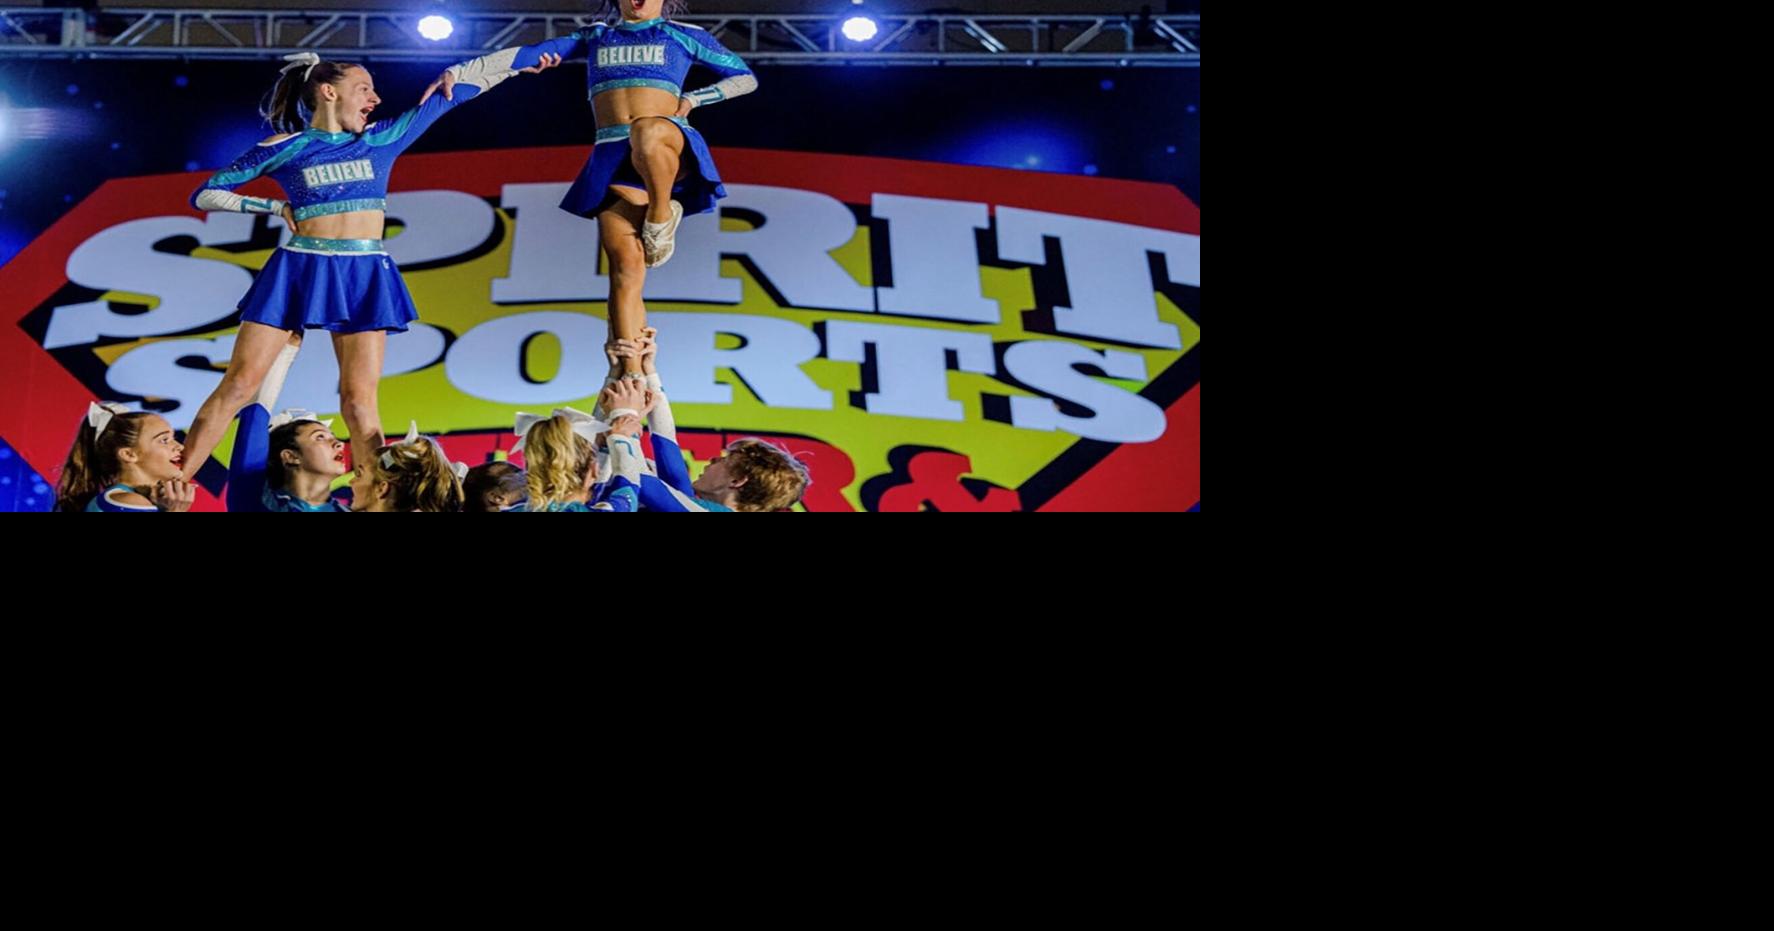 ALL STAR ELITE CHEER - Southern Heat